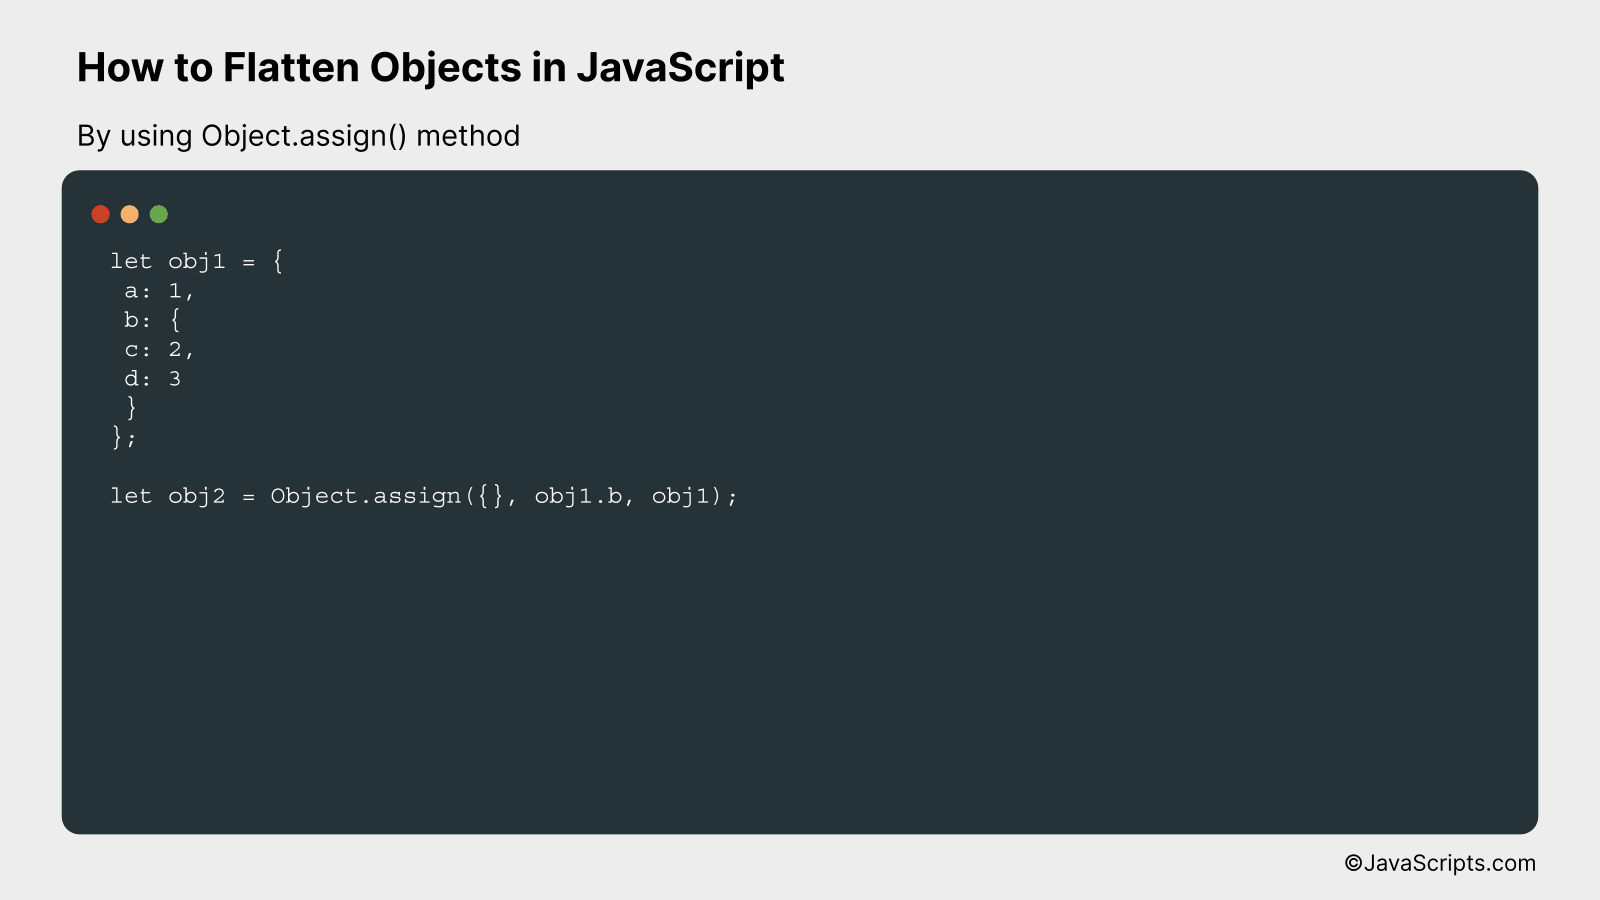 By using Object.assign() method